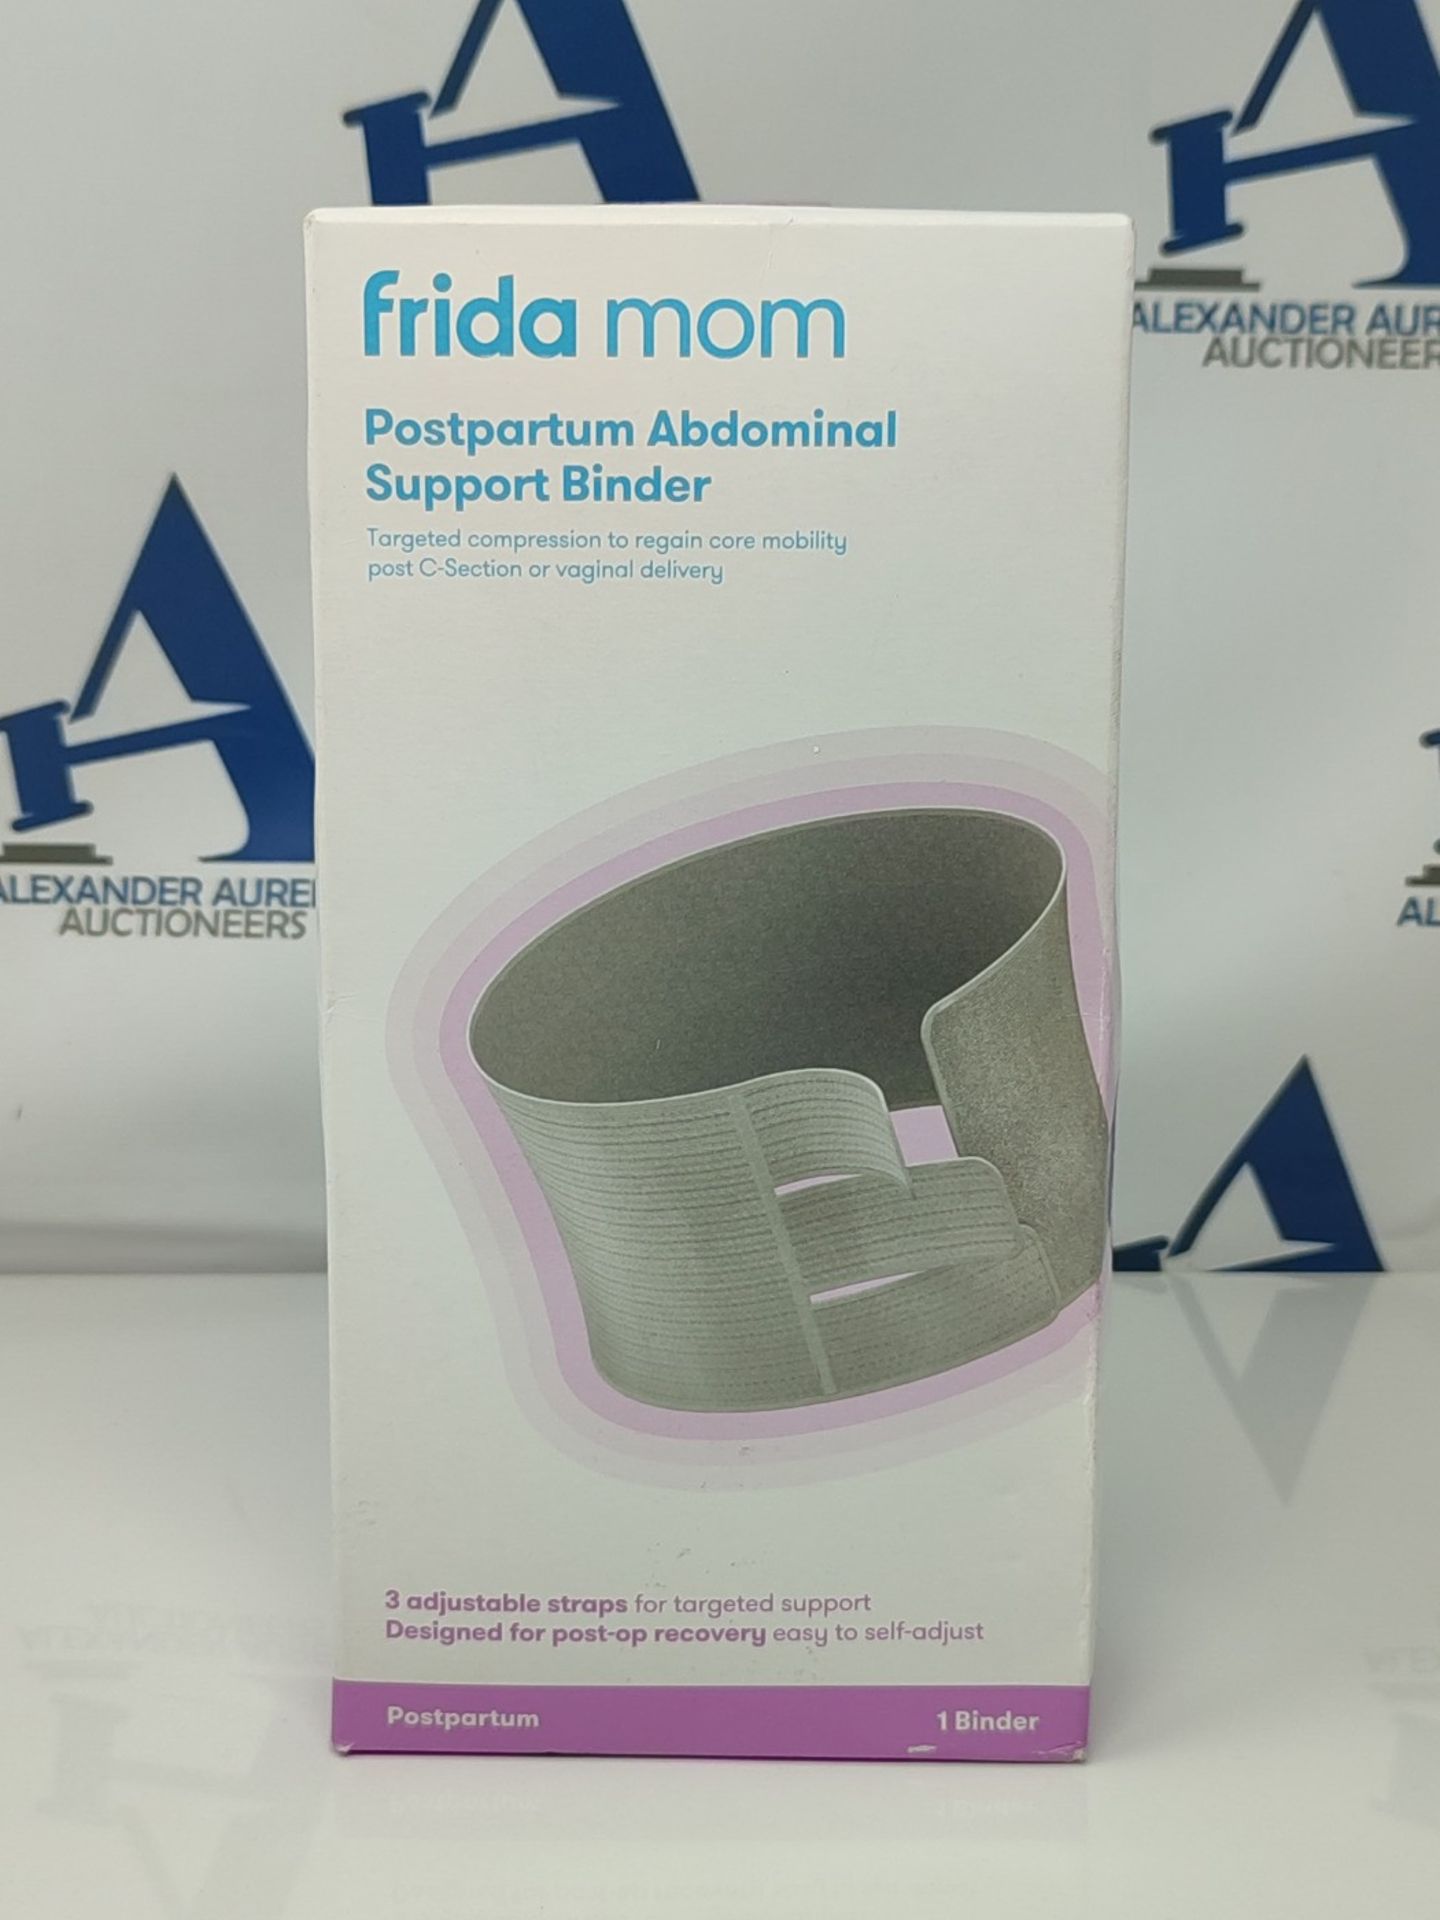 Frida Mom Postpartum Abdominal Support Binder | Vaginal Delivery & C-Section Recovery - Image 2 of 3